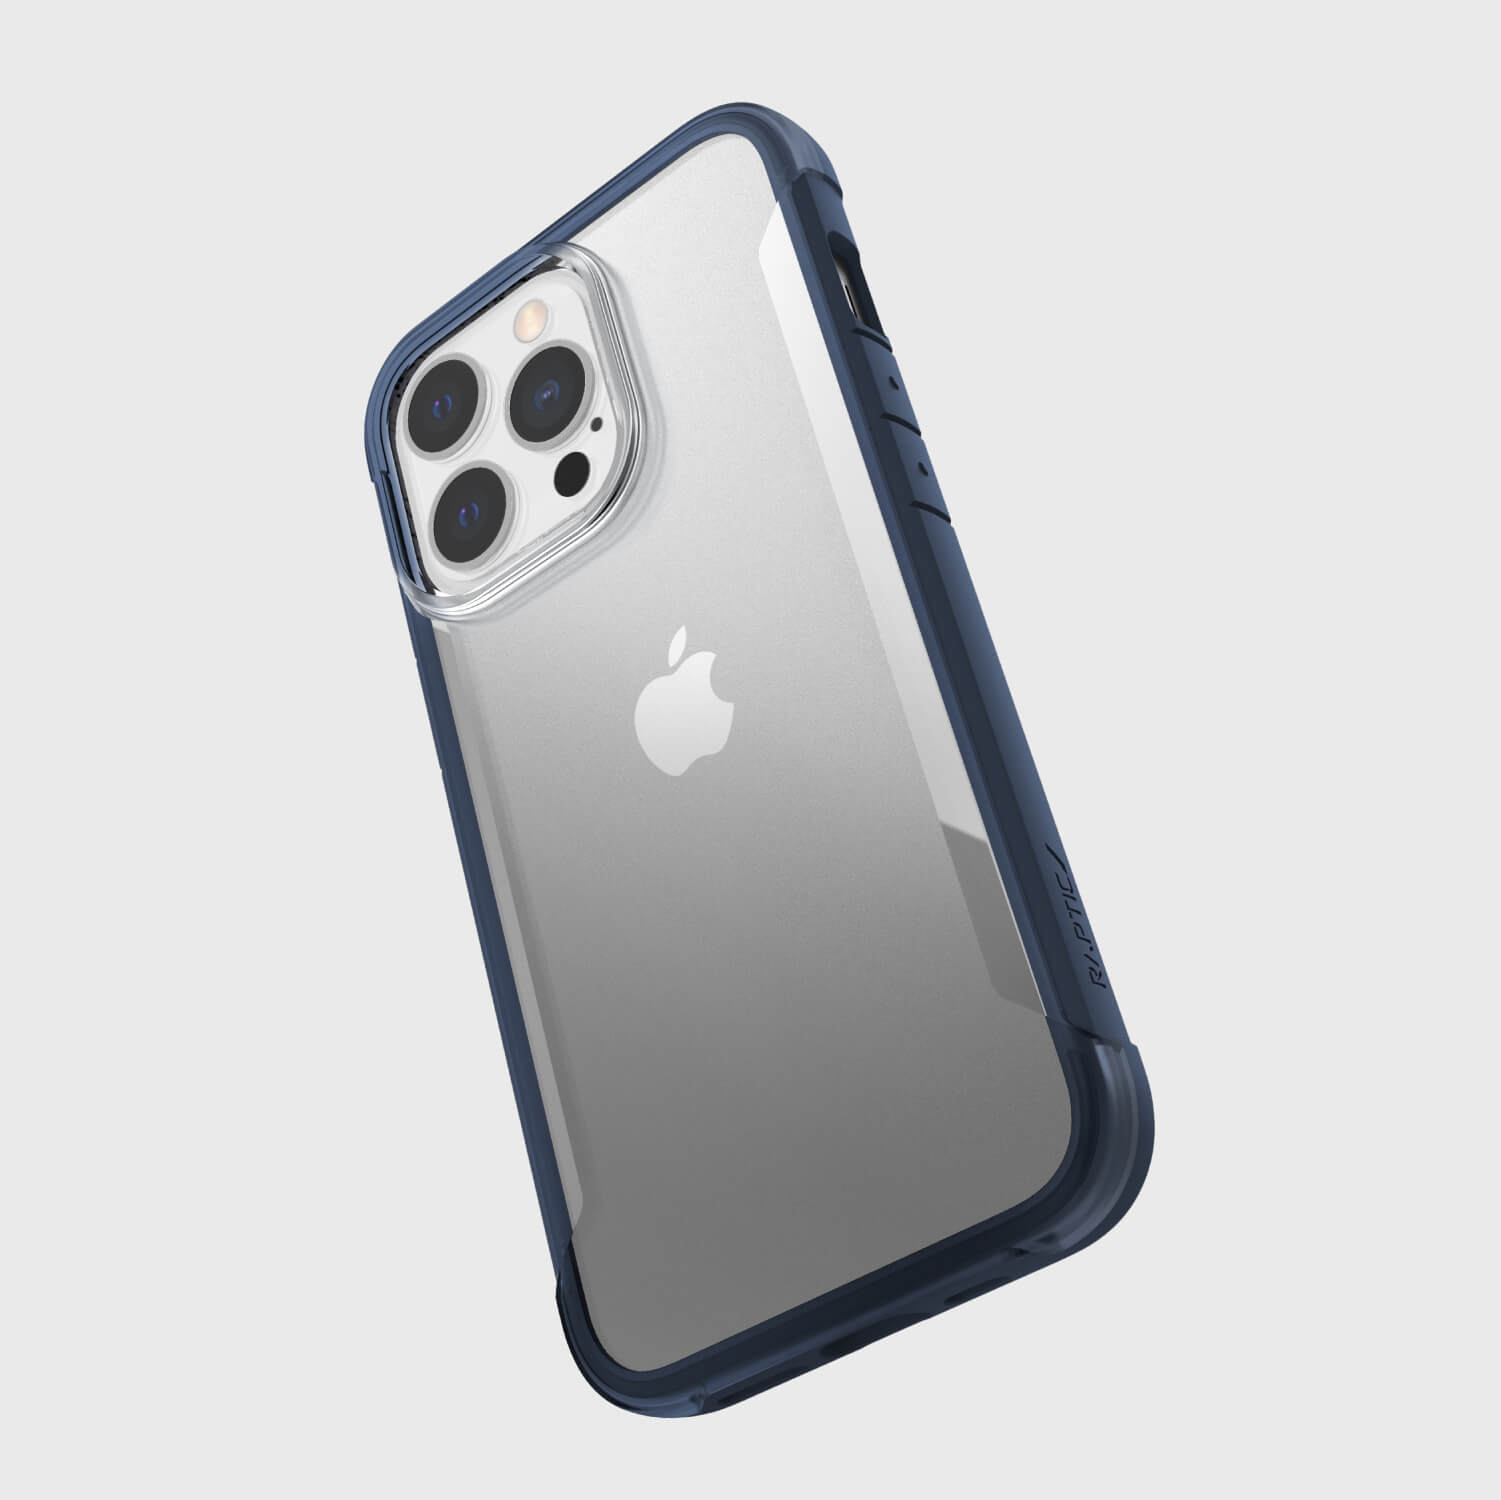 An eco-friendly, biodegradable iPhone 13 Pro Case - TERRAIN in blue by Raptic.